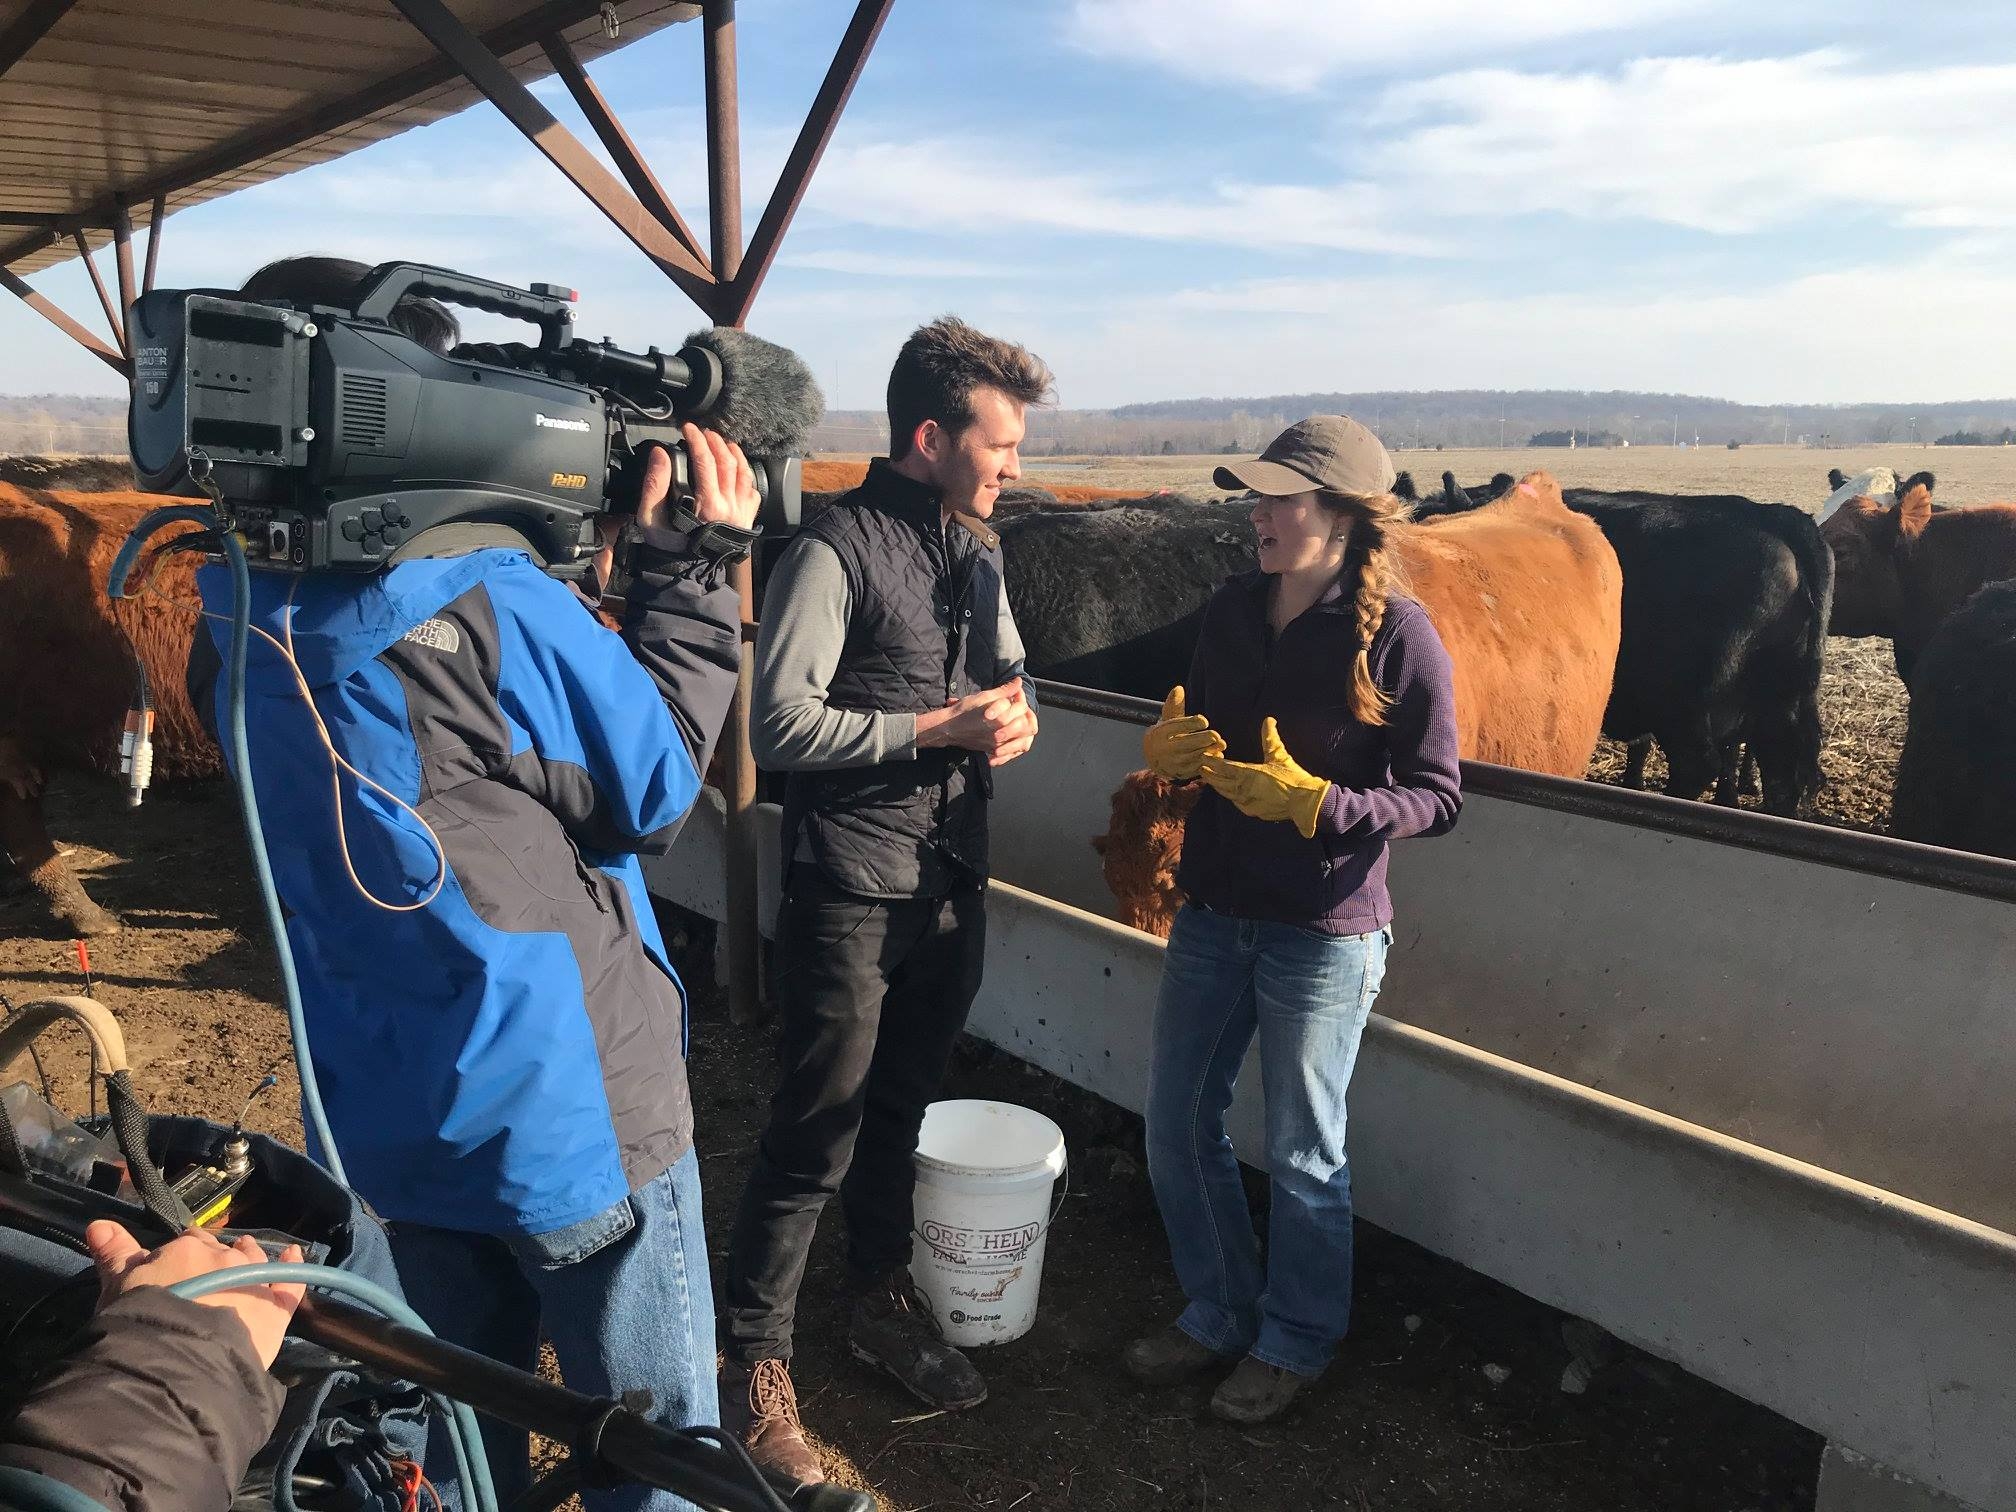 Behind the Scenes of My Interview with MSNBC About Sustainable Beef